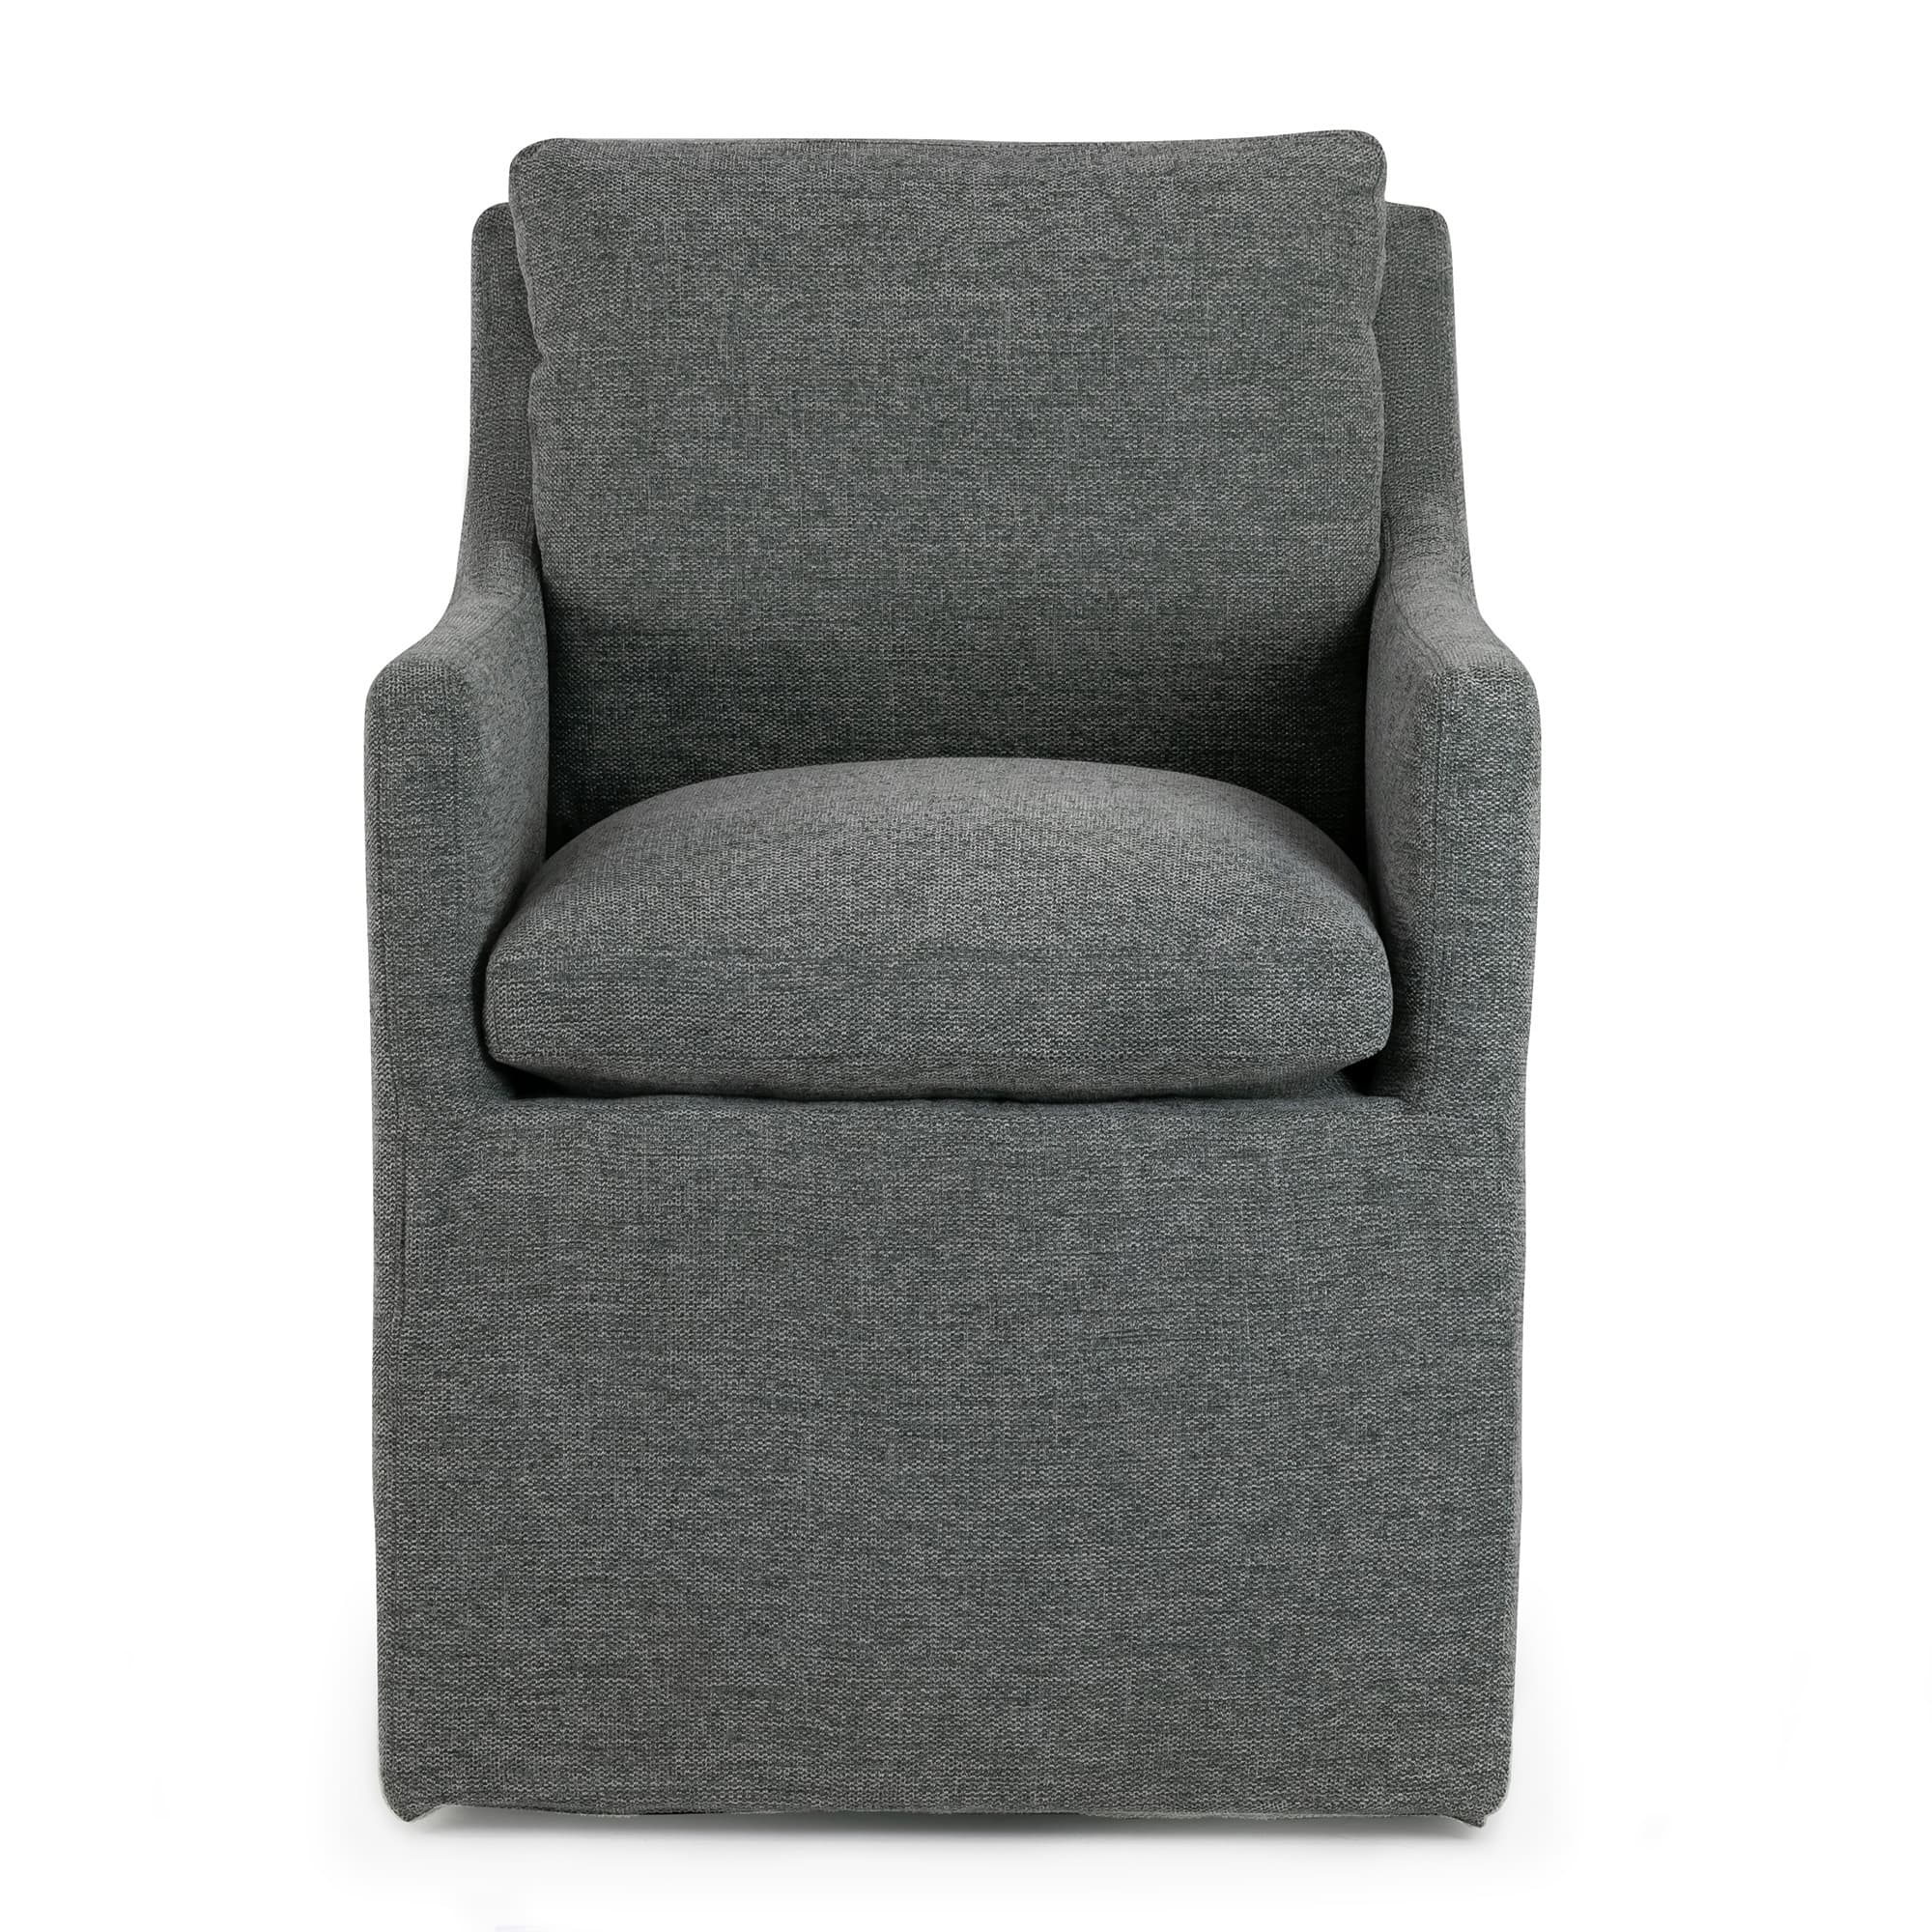 Axel Gray Fabric Accent Chair with Down Feathers - Bed Bath & Beyond ...